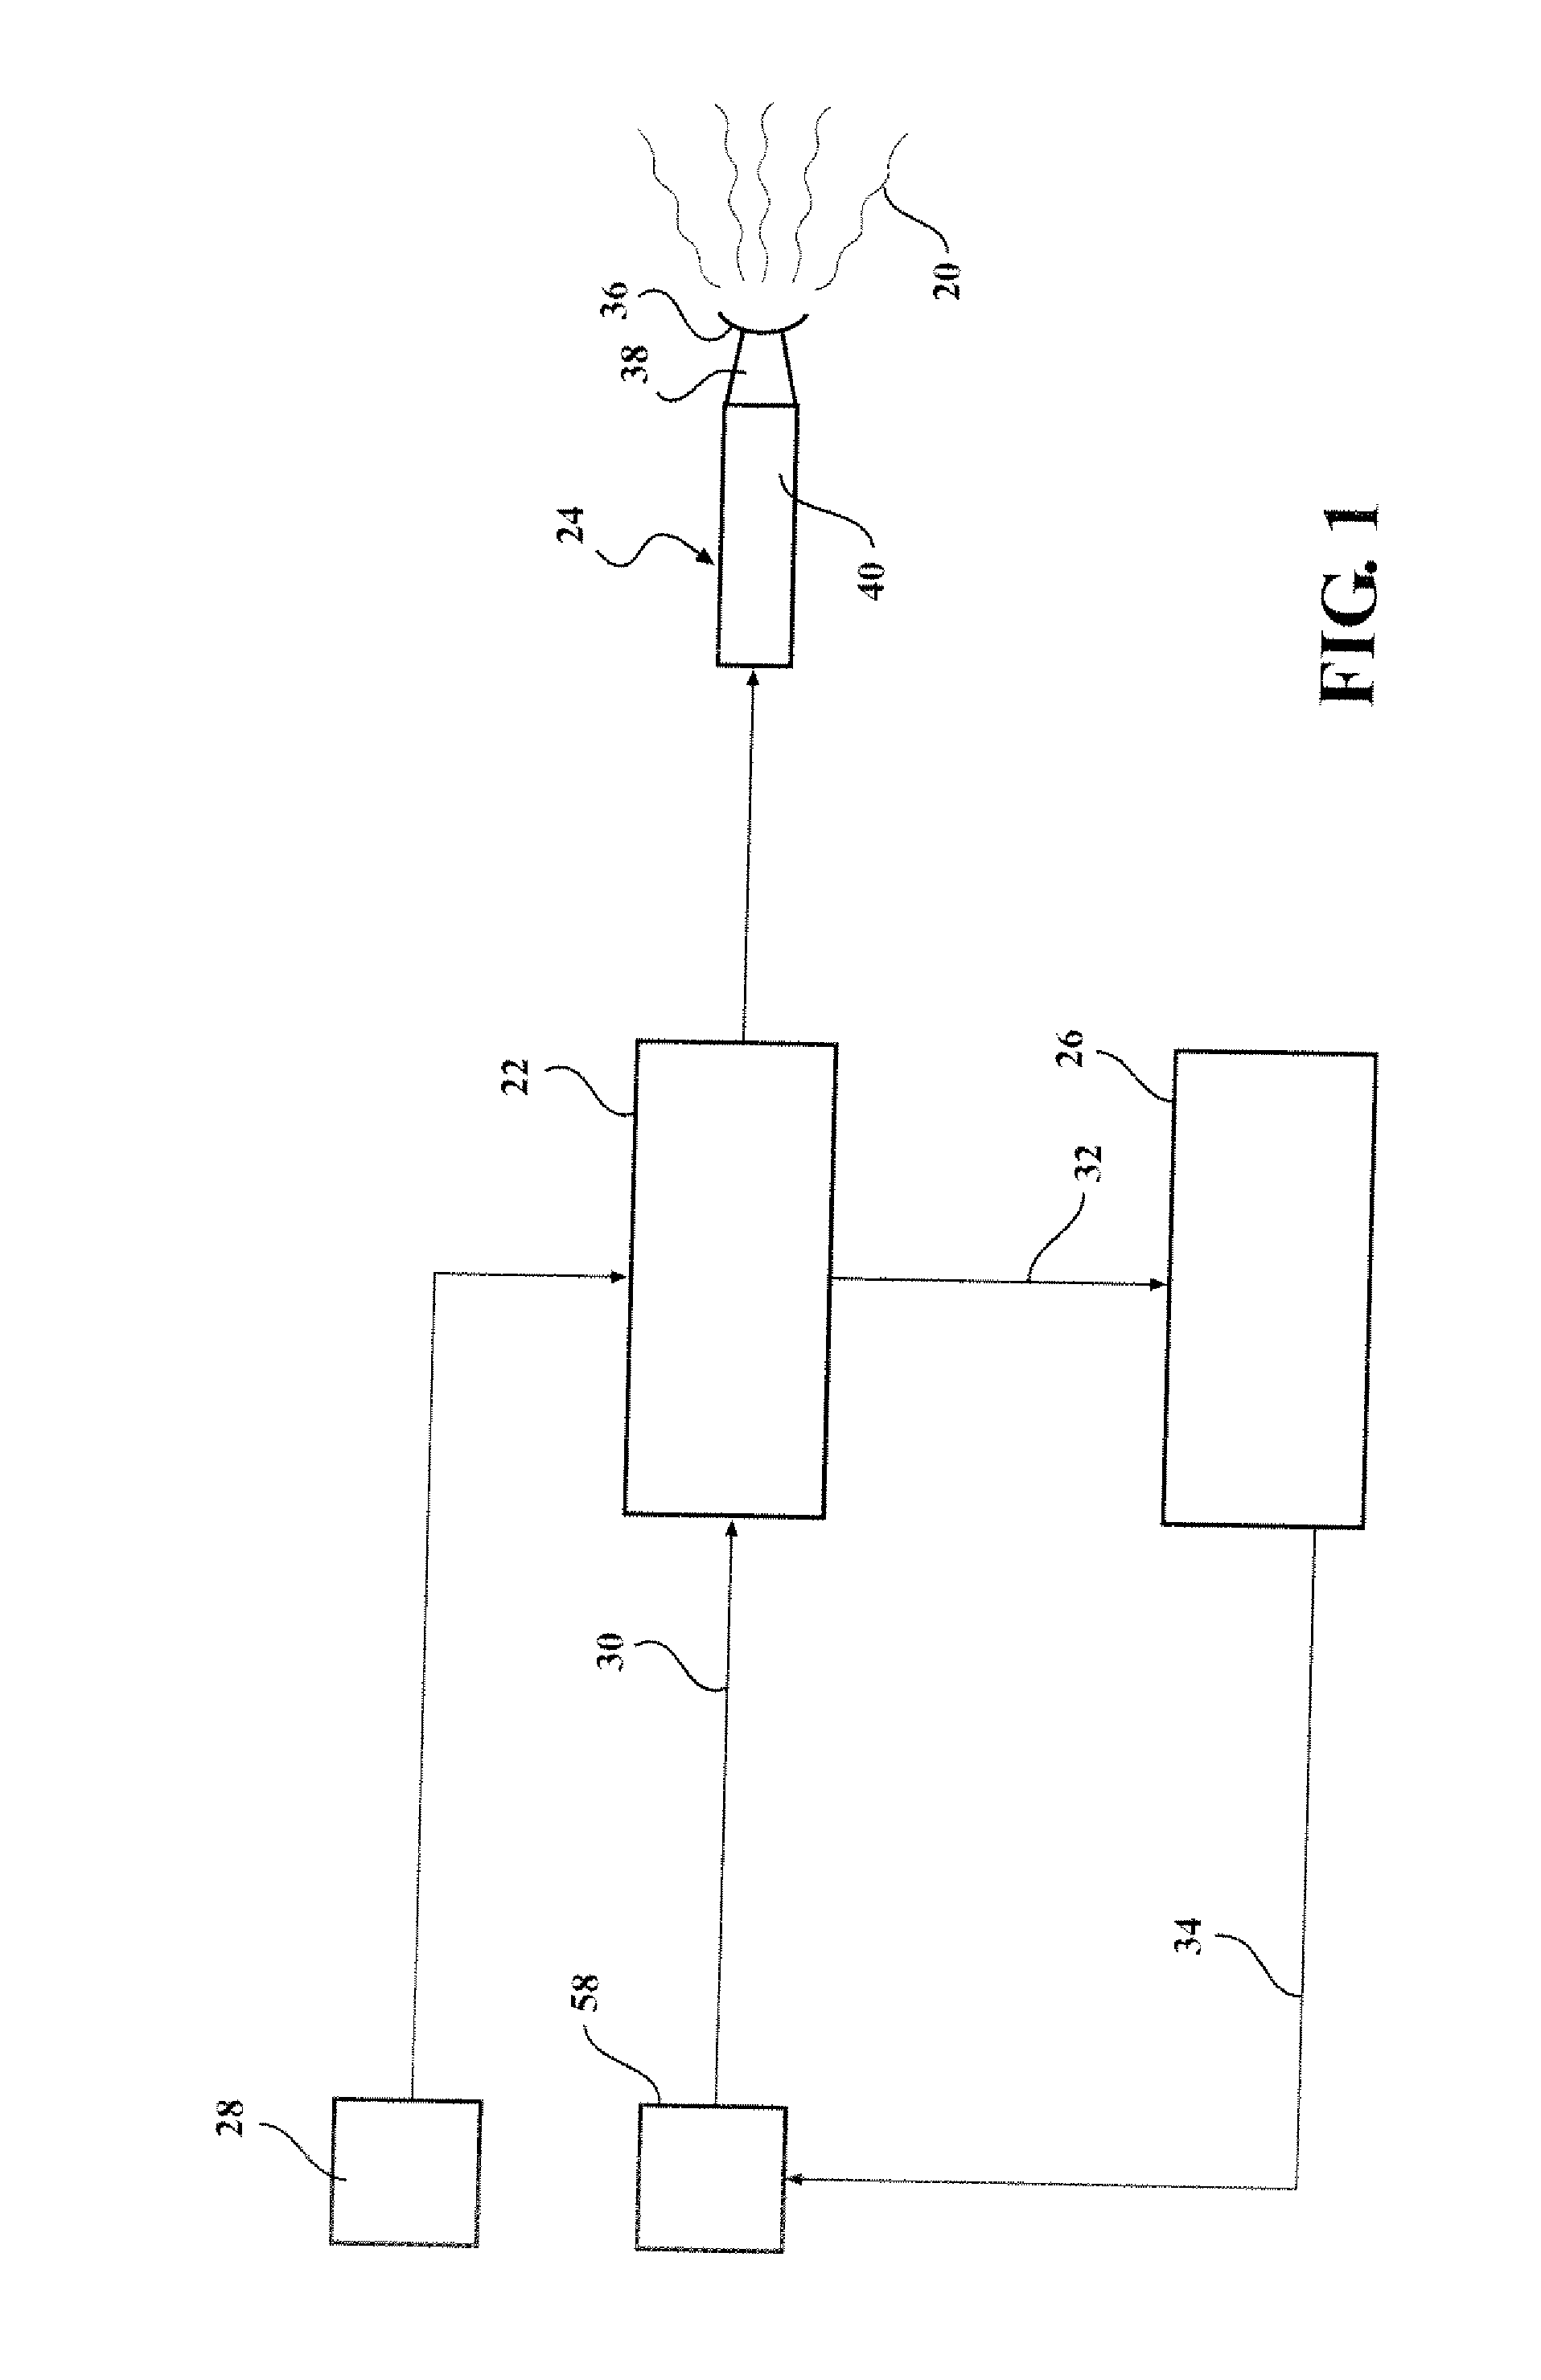 System and method for detecting arc formation in a corona discharge ignition system